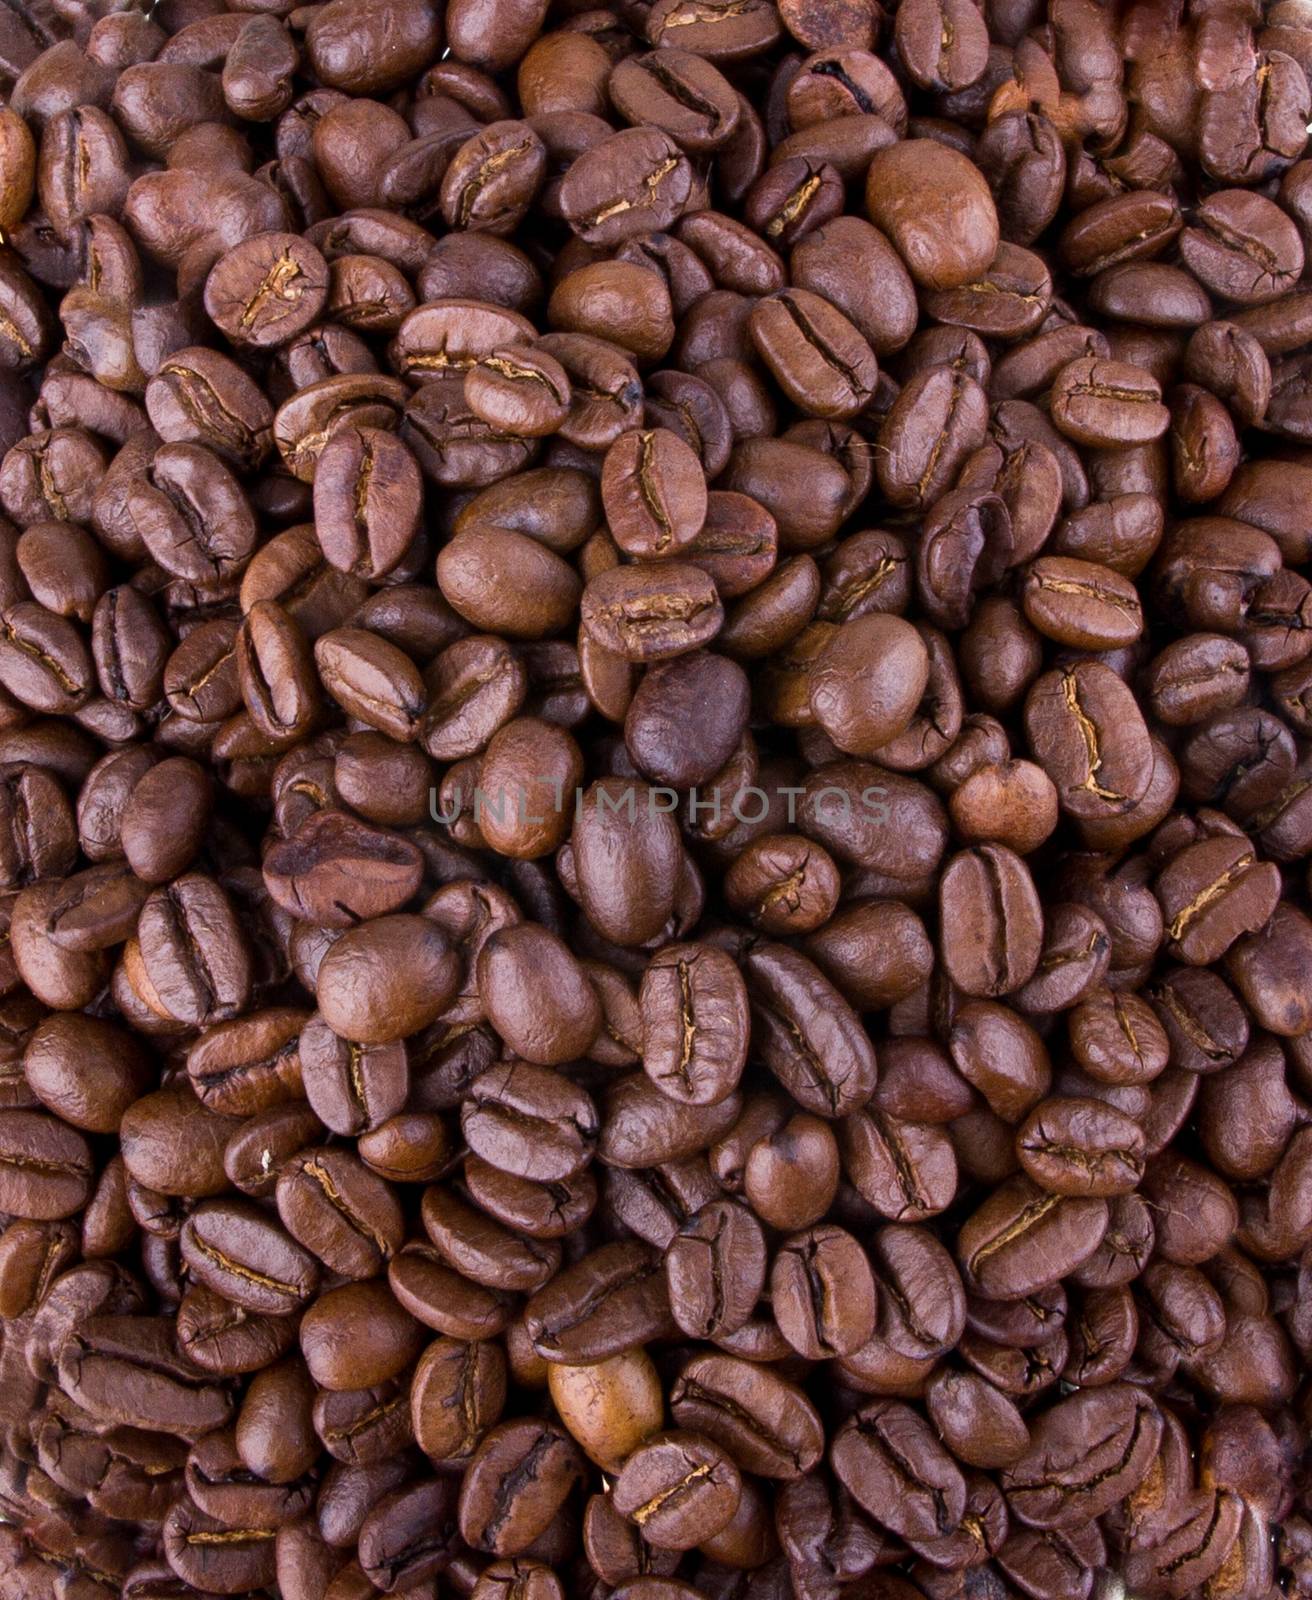 Black roasted coffee beans by tehcheesiong